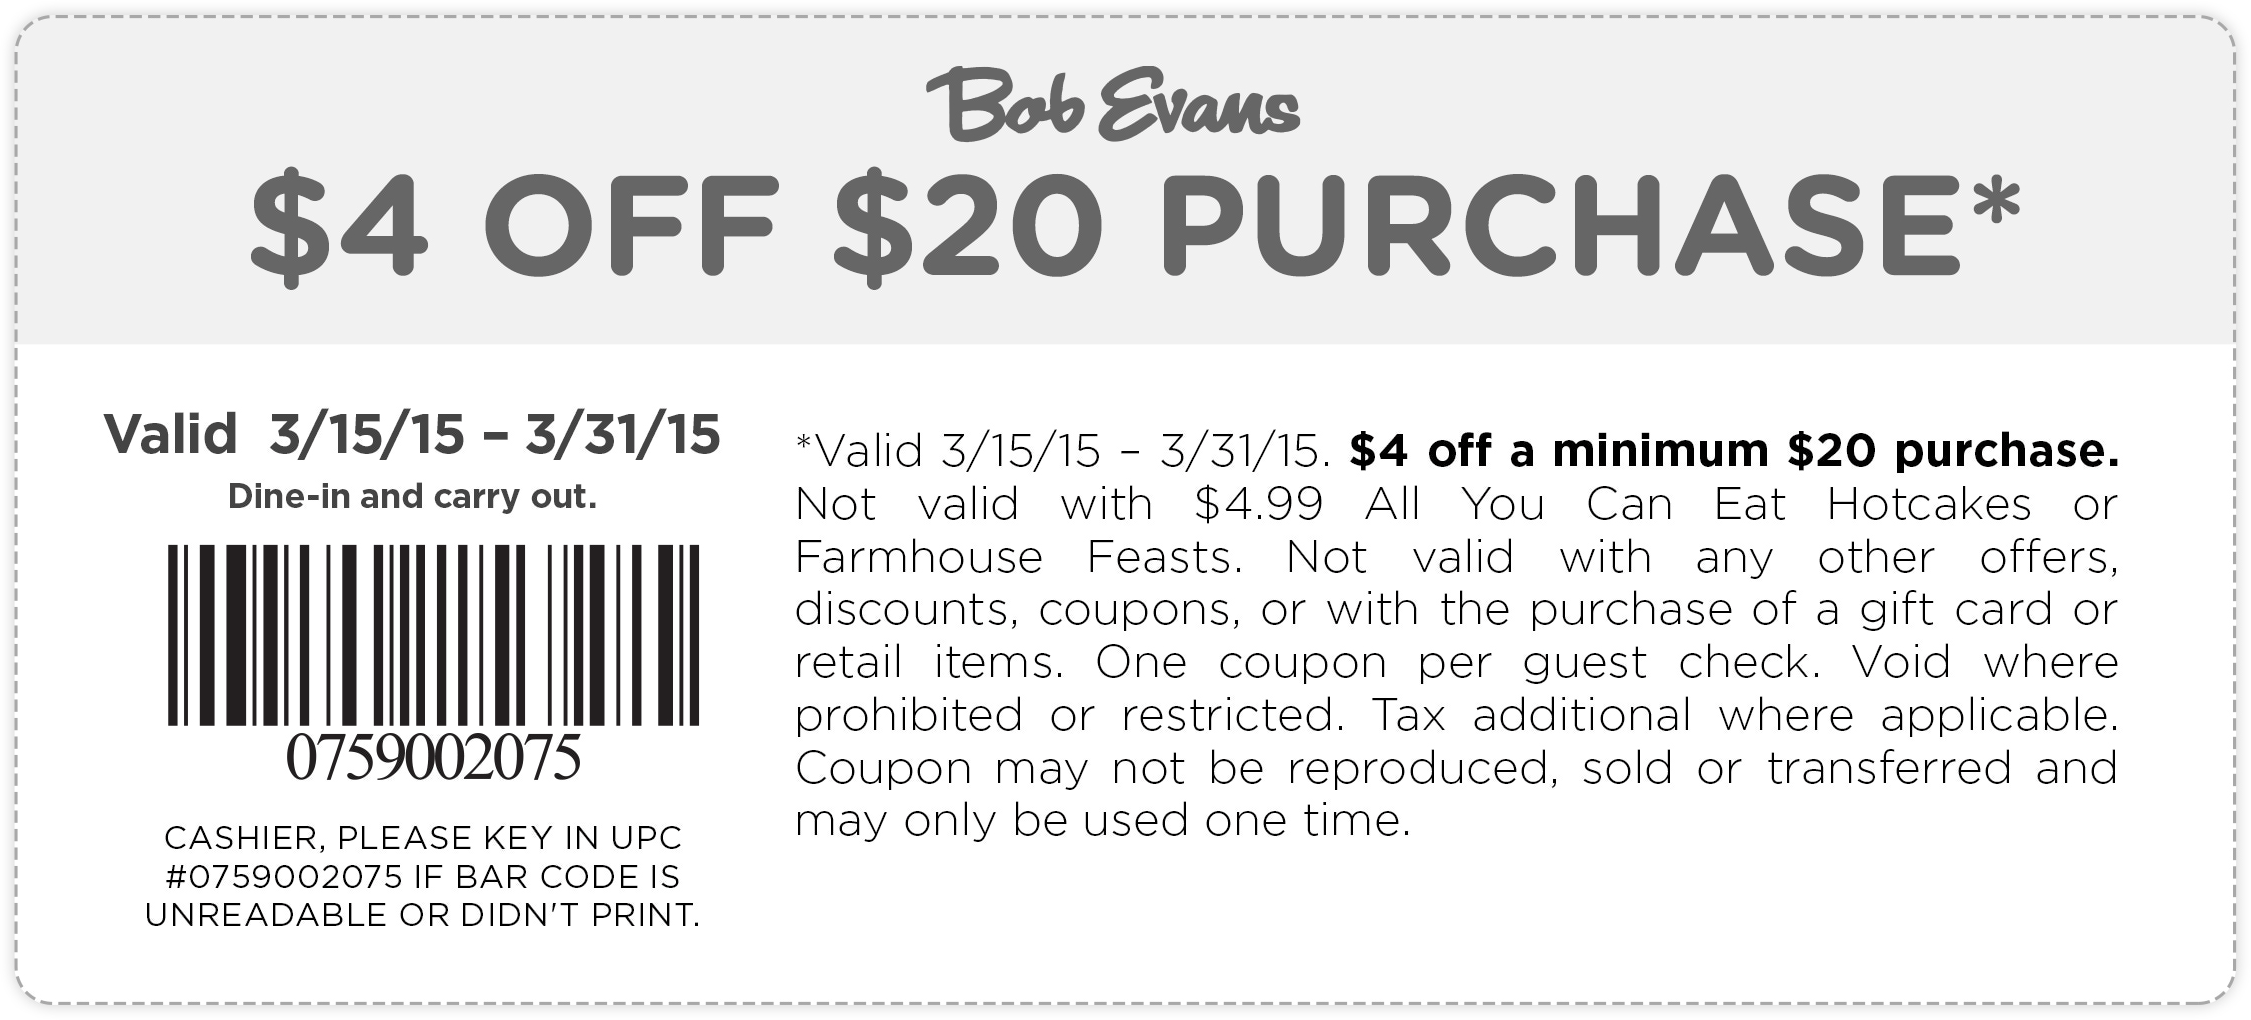 Bob Evans June 2020 Coupons and Promo Codes 🛒